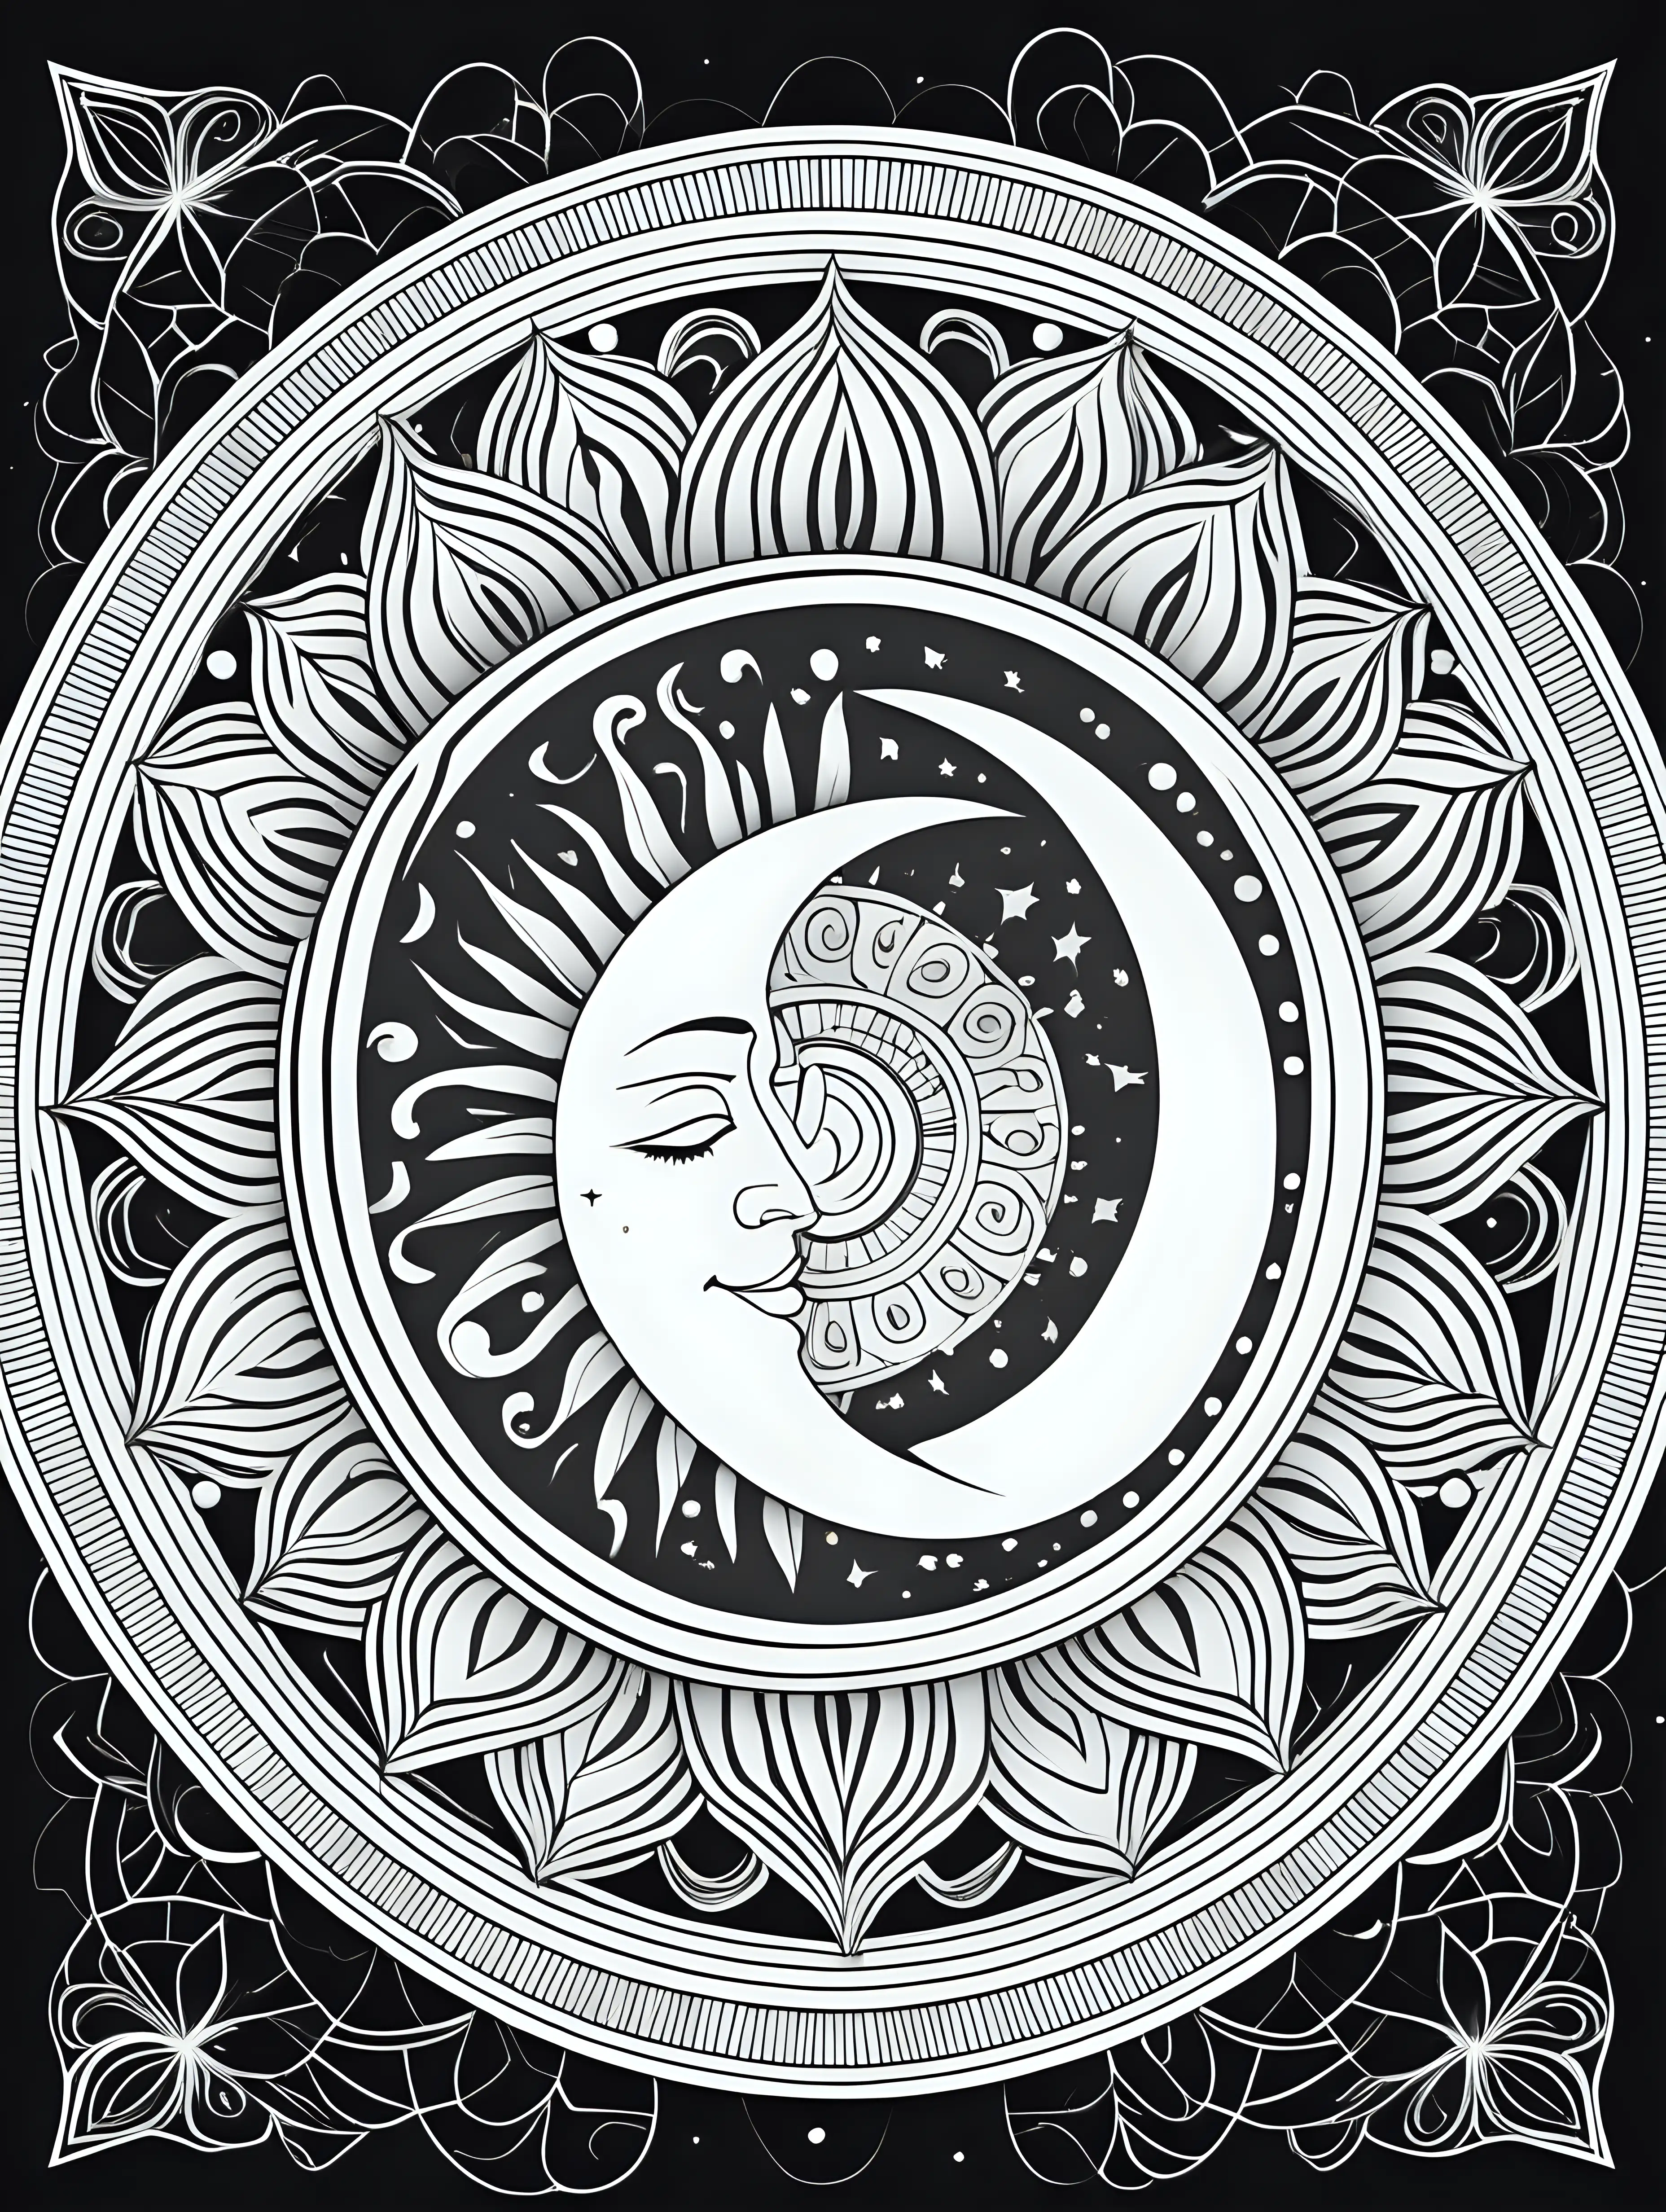 Mandala Moon Coloring Page with Thick Lines